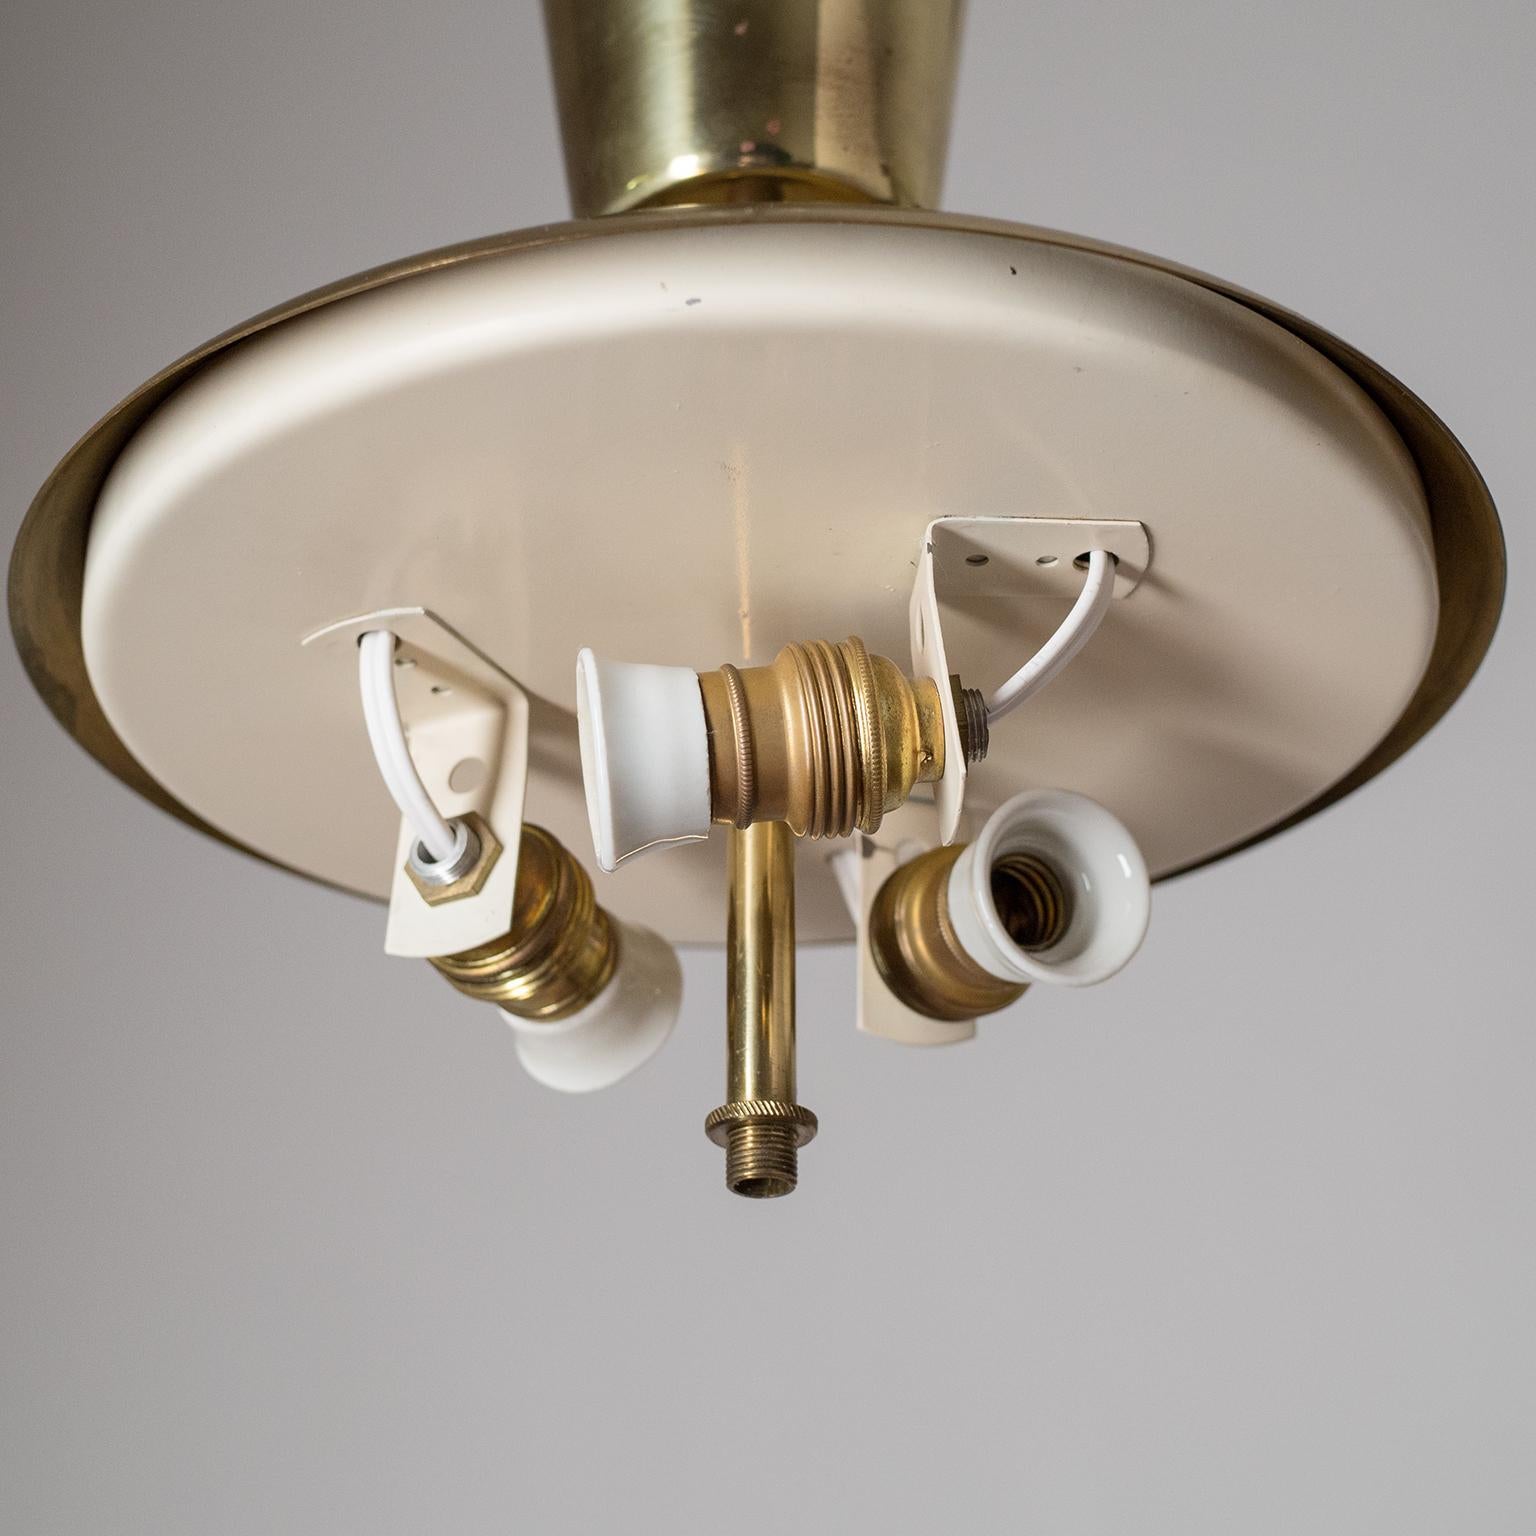 Ceiling Light, 1940s, Brass and Satin Glass 2